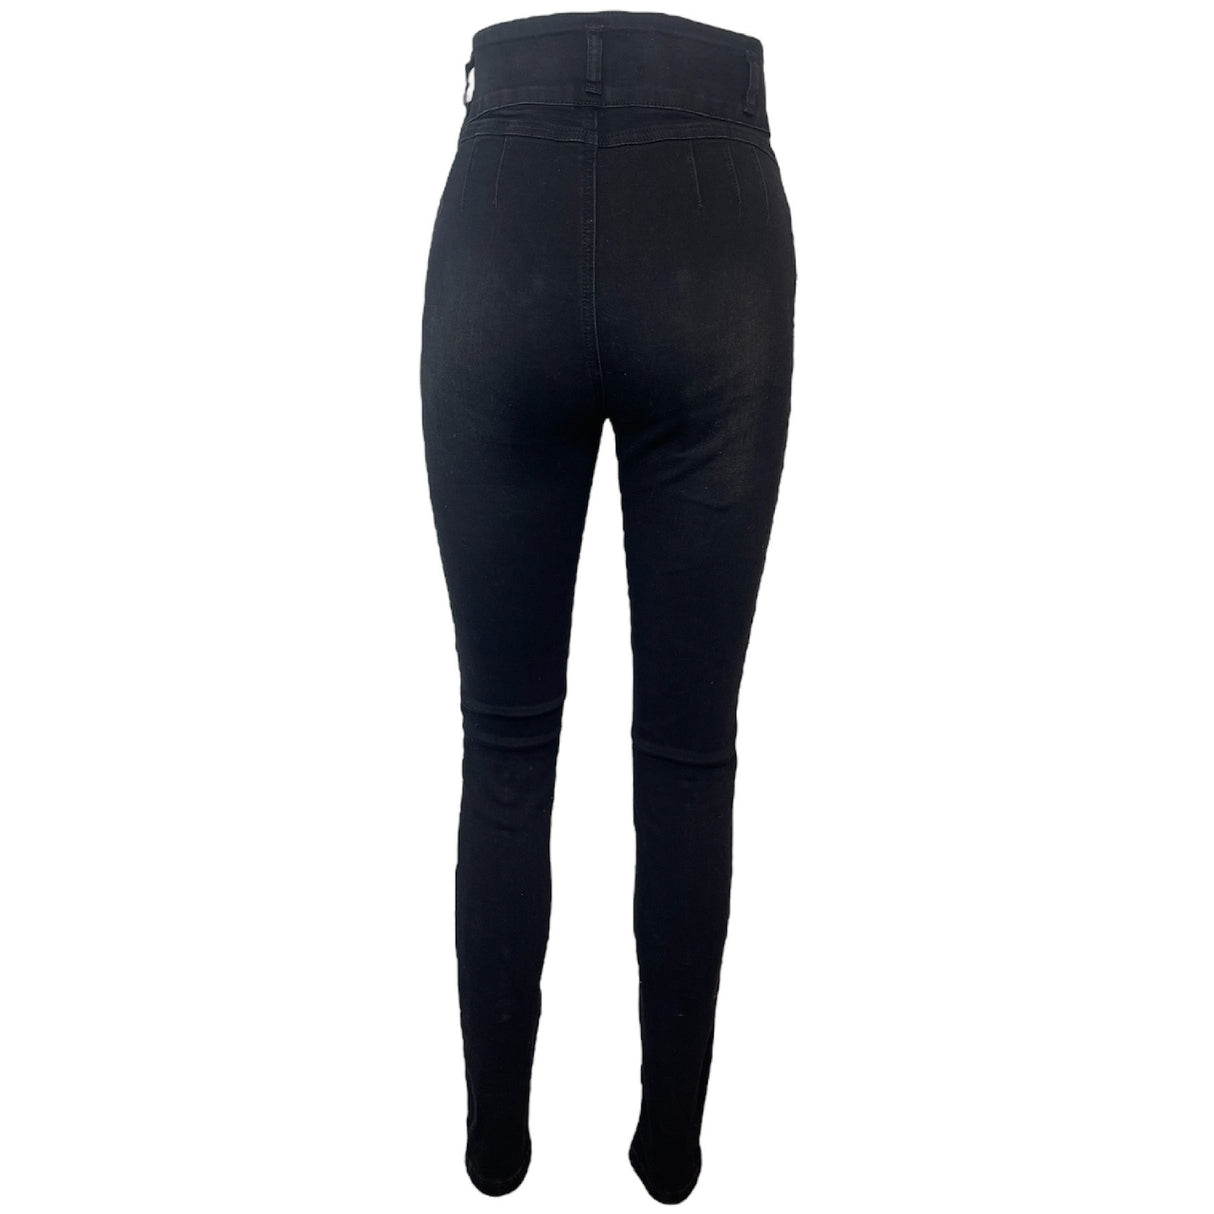 A Second Chance - Shein Skinny Jeans Black Women - Delivery All Over Lebanon